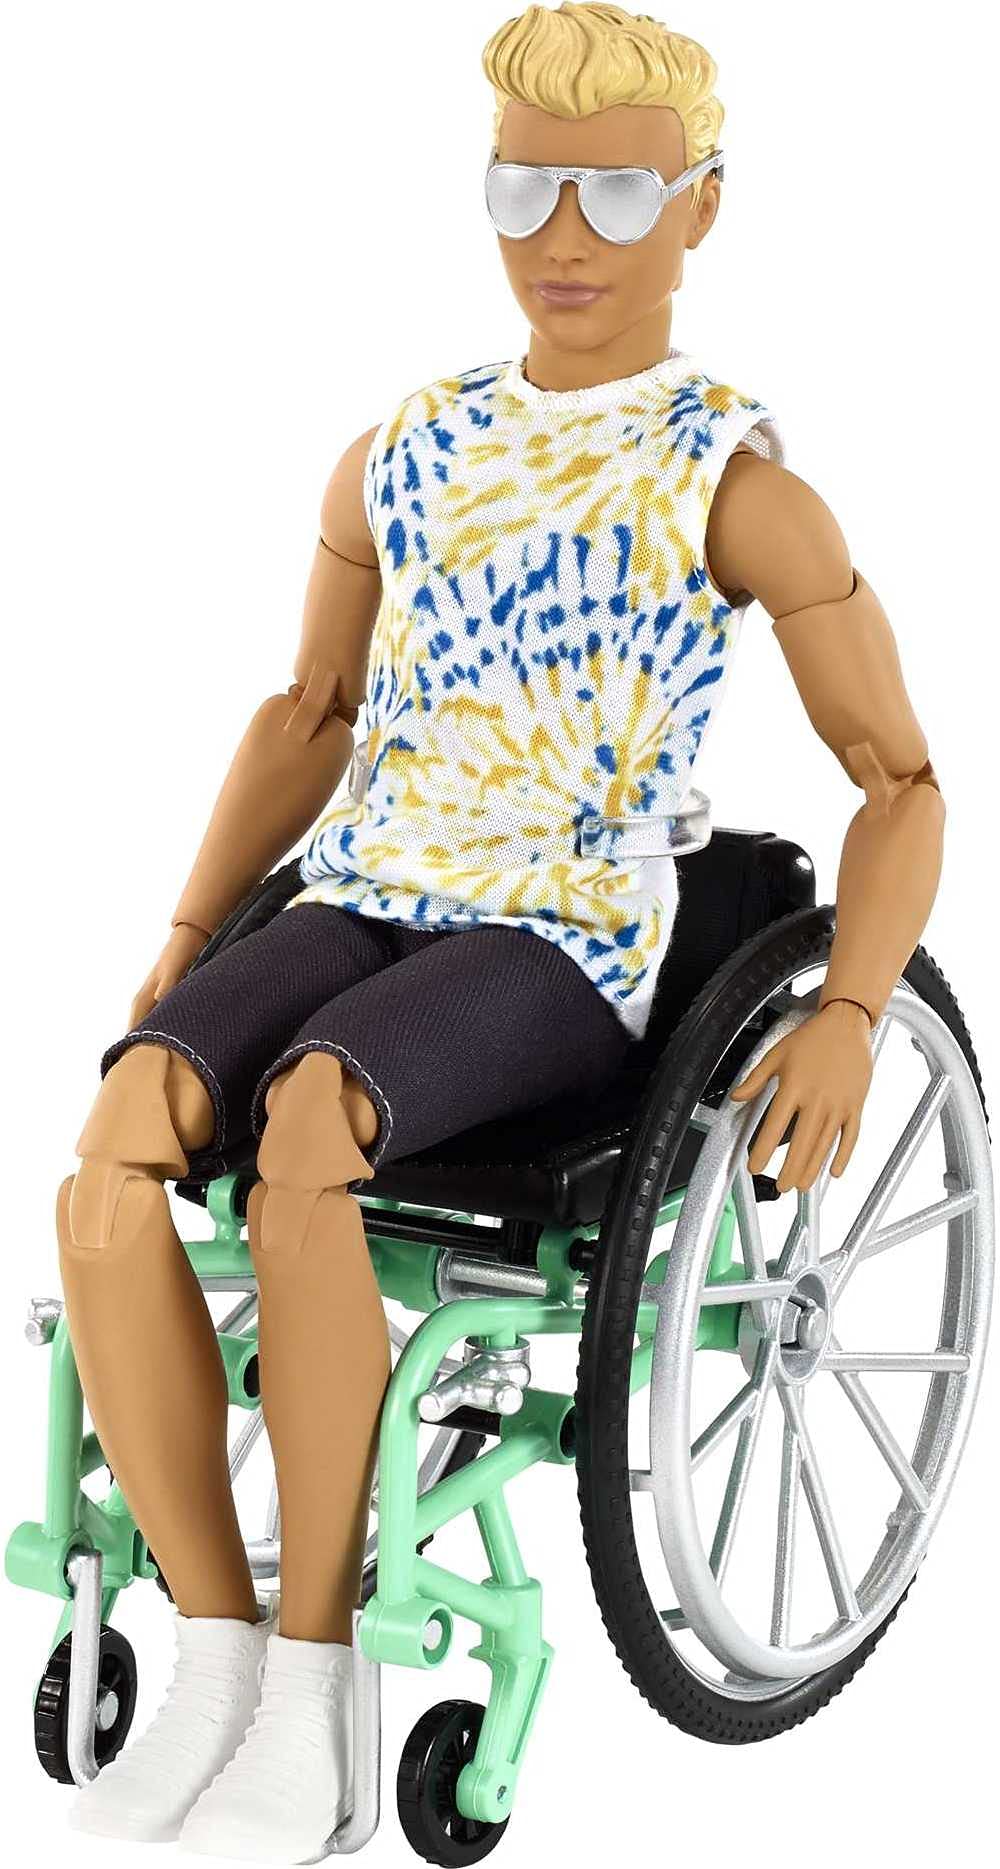 Barbie Ken Fashionistas Doll #167 with Wheelchair & Ramp Wearing Tie-Dye Shirt, Black Shorts, White Sneakers & Sunglasses, Toy for Kids 3 to 8 Years Old